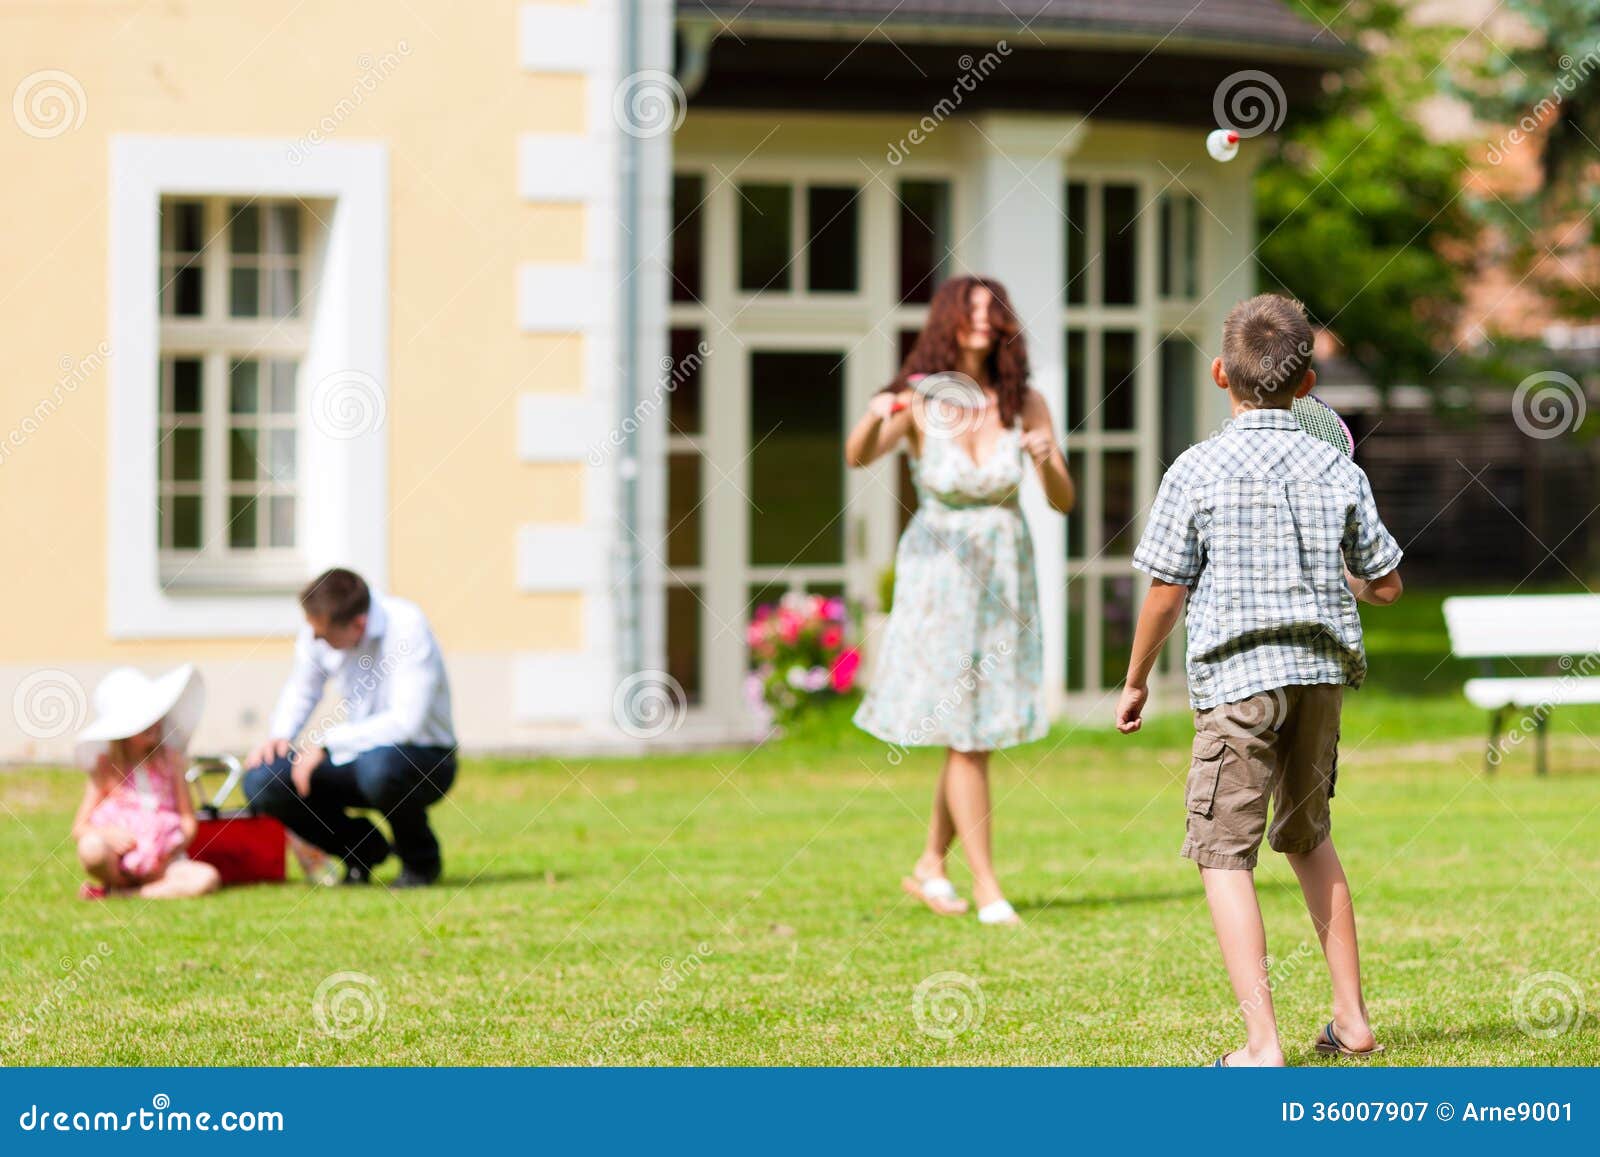 Children Playing In The House Area | Modern Diy Art Design Collection